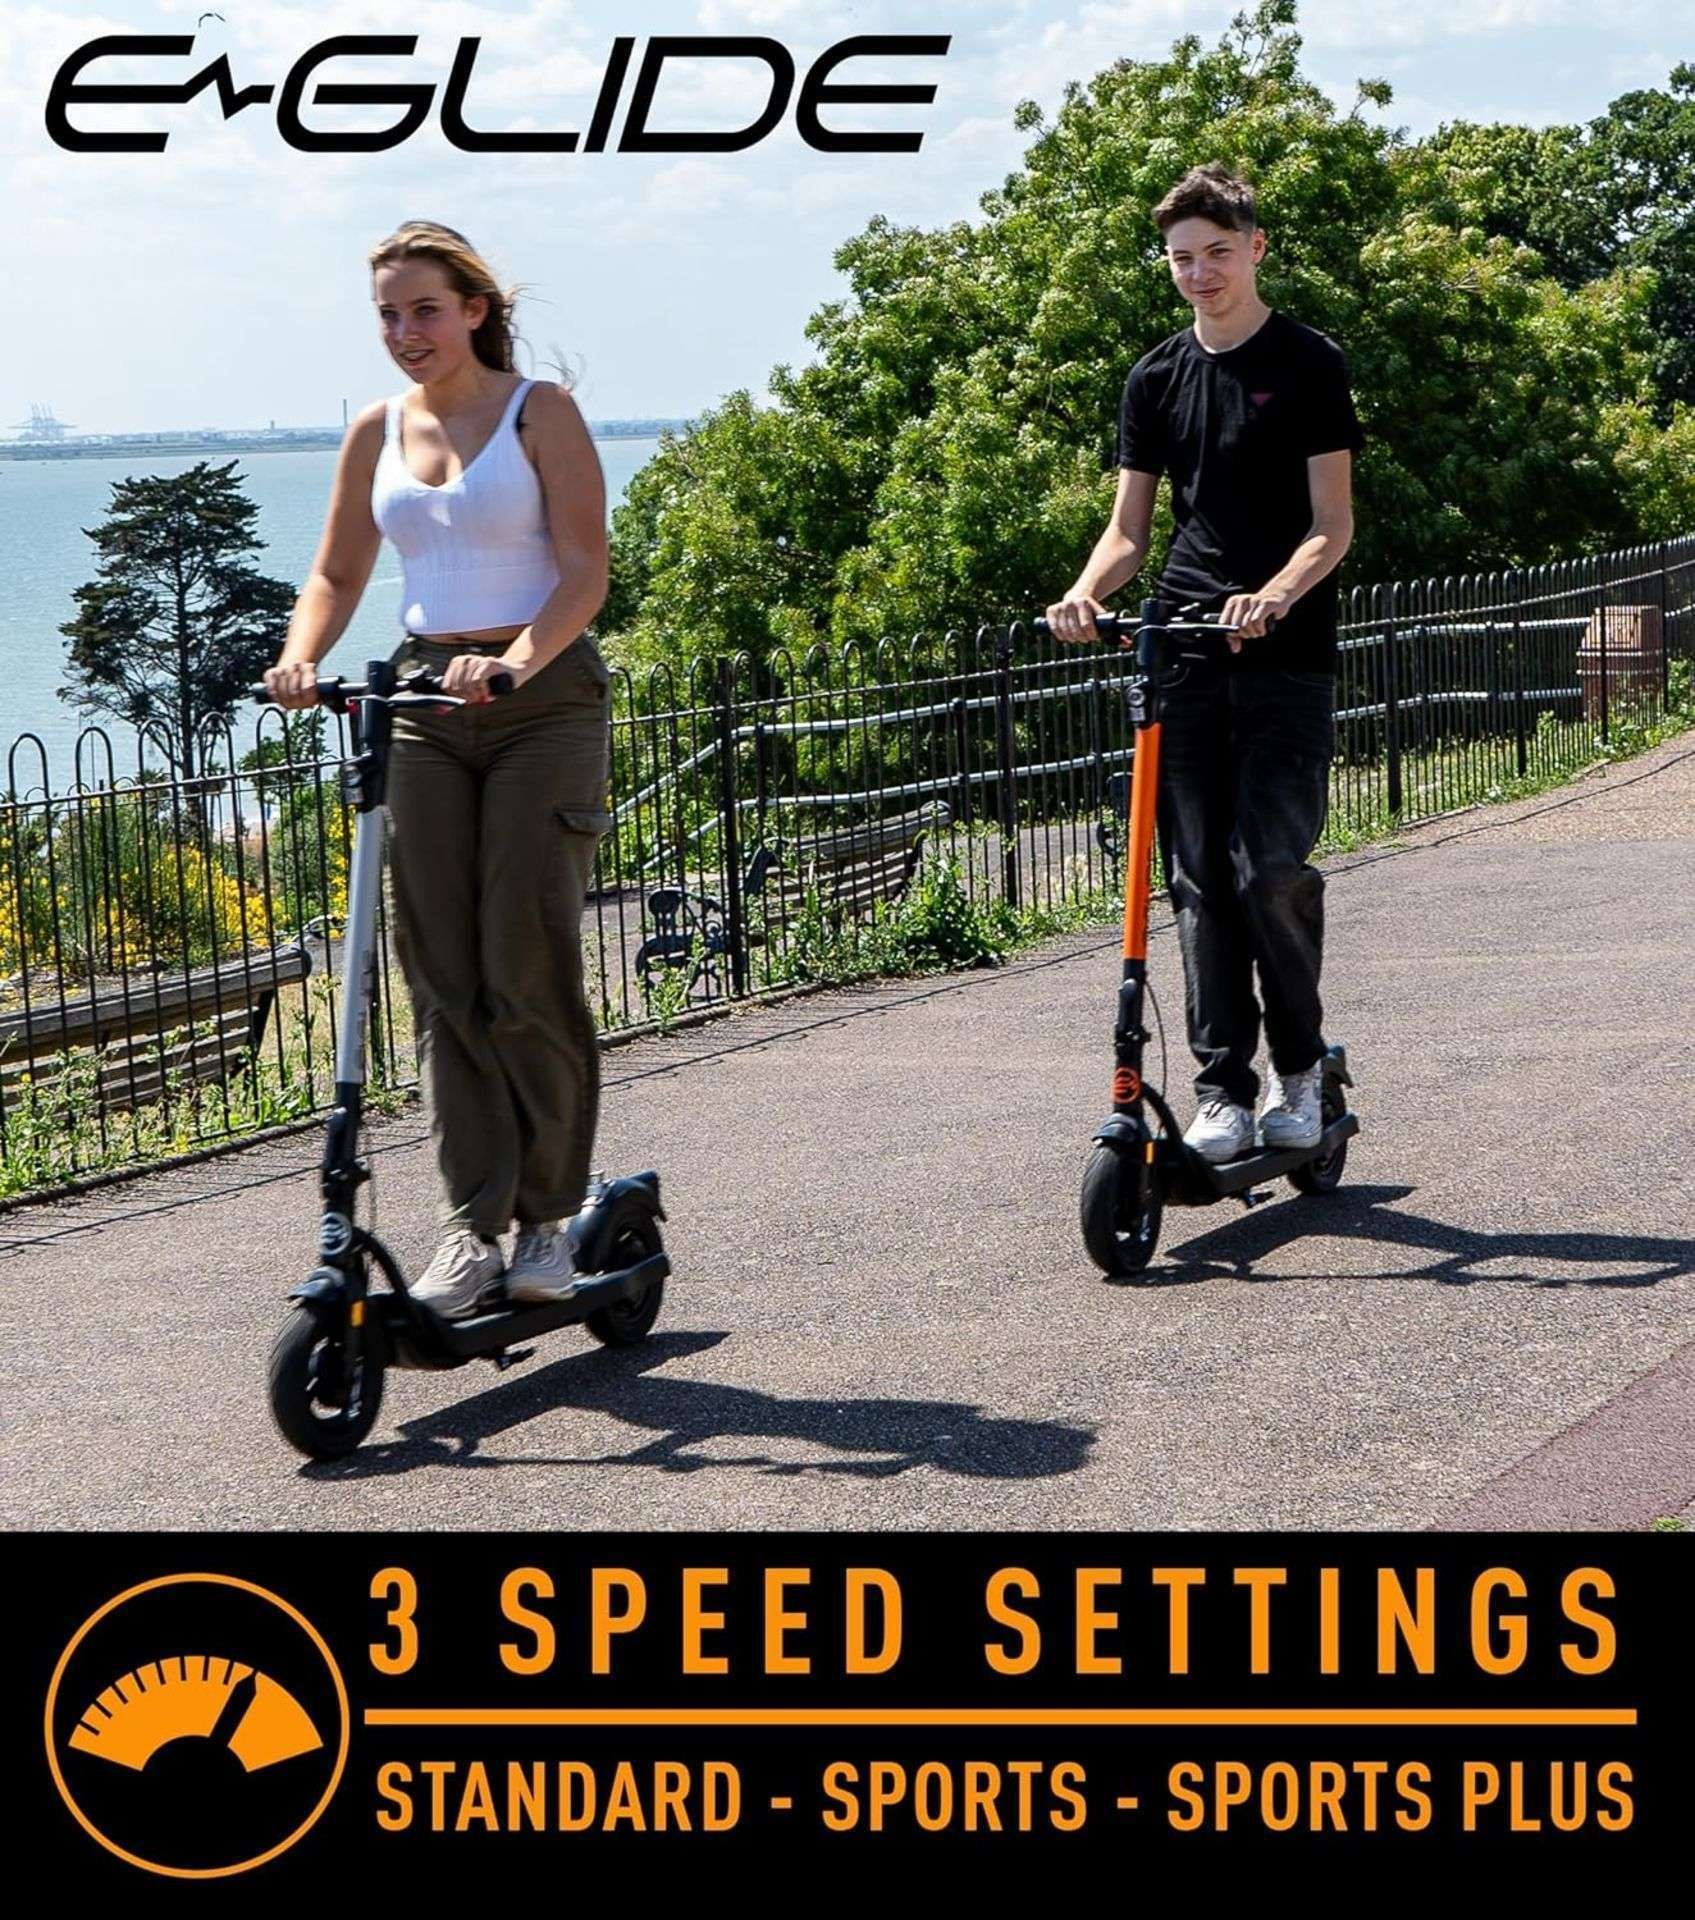 Brand New E-Glide V2 Electric Scooter Orange and Black RRP £599, Introducing a sleek and efficient - Bild 4 aus 4